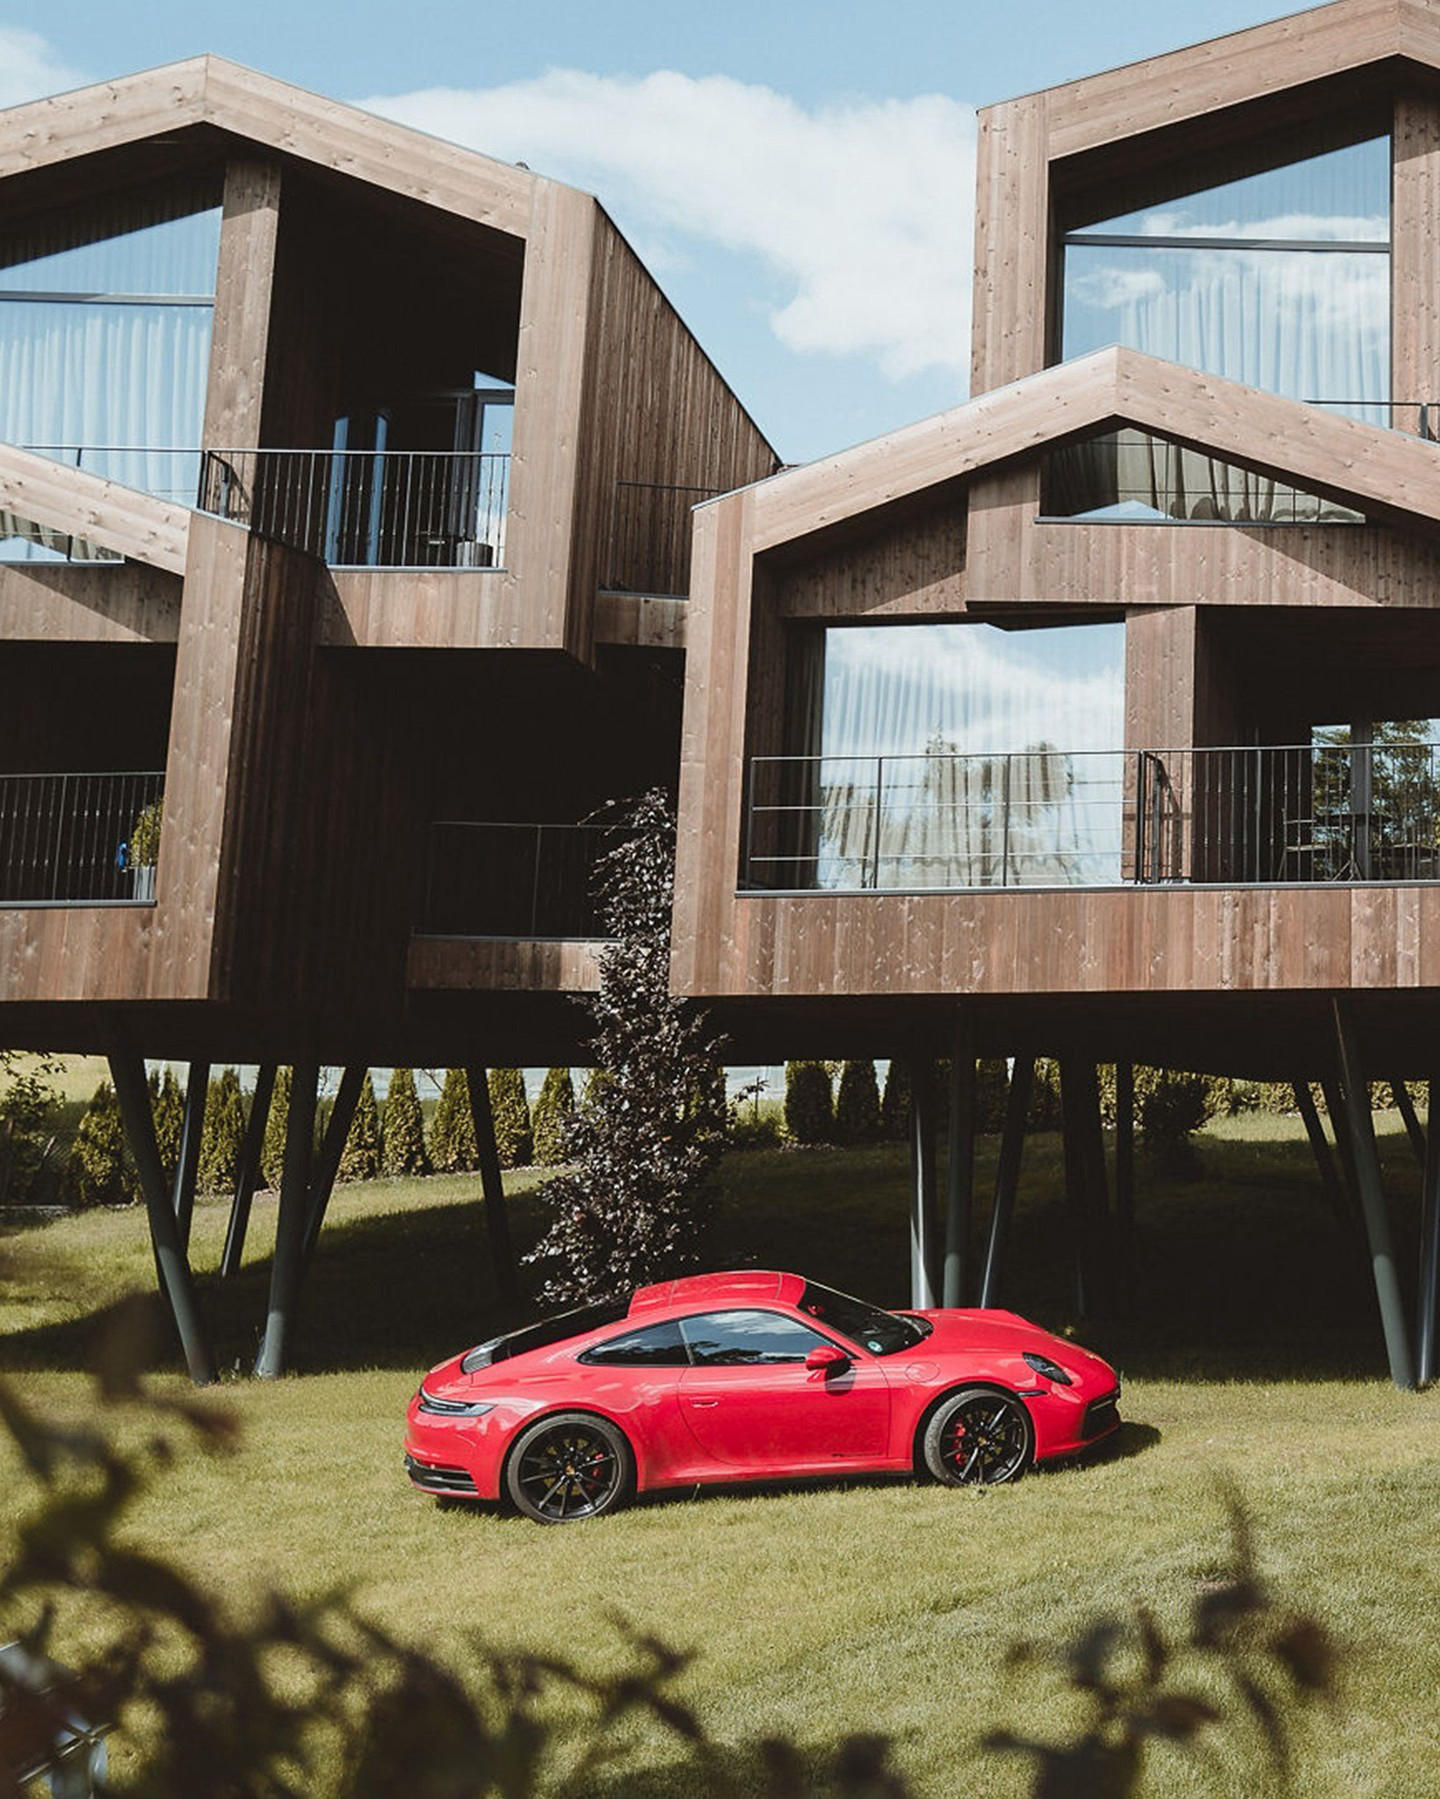 Porsche - Take a sustainable Alpine tour and greet sustainable buildings that blend beautifully with